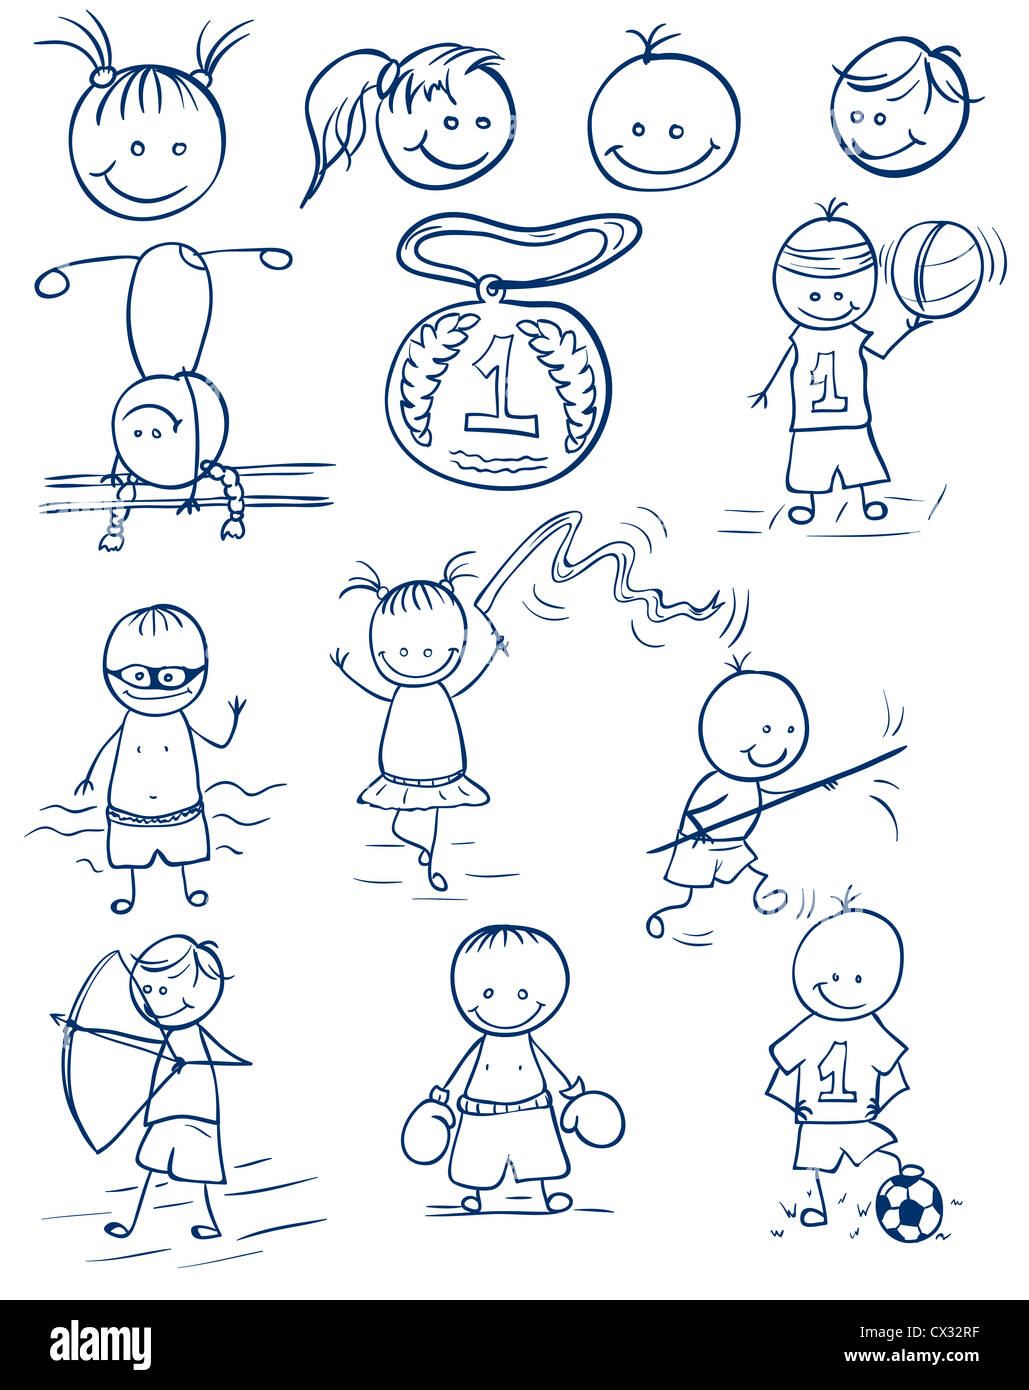 Funny children's pictures of different athletes. Illustration done in the style doodle. Stock Photo